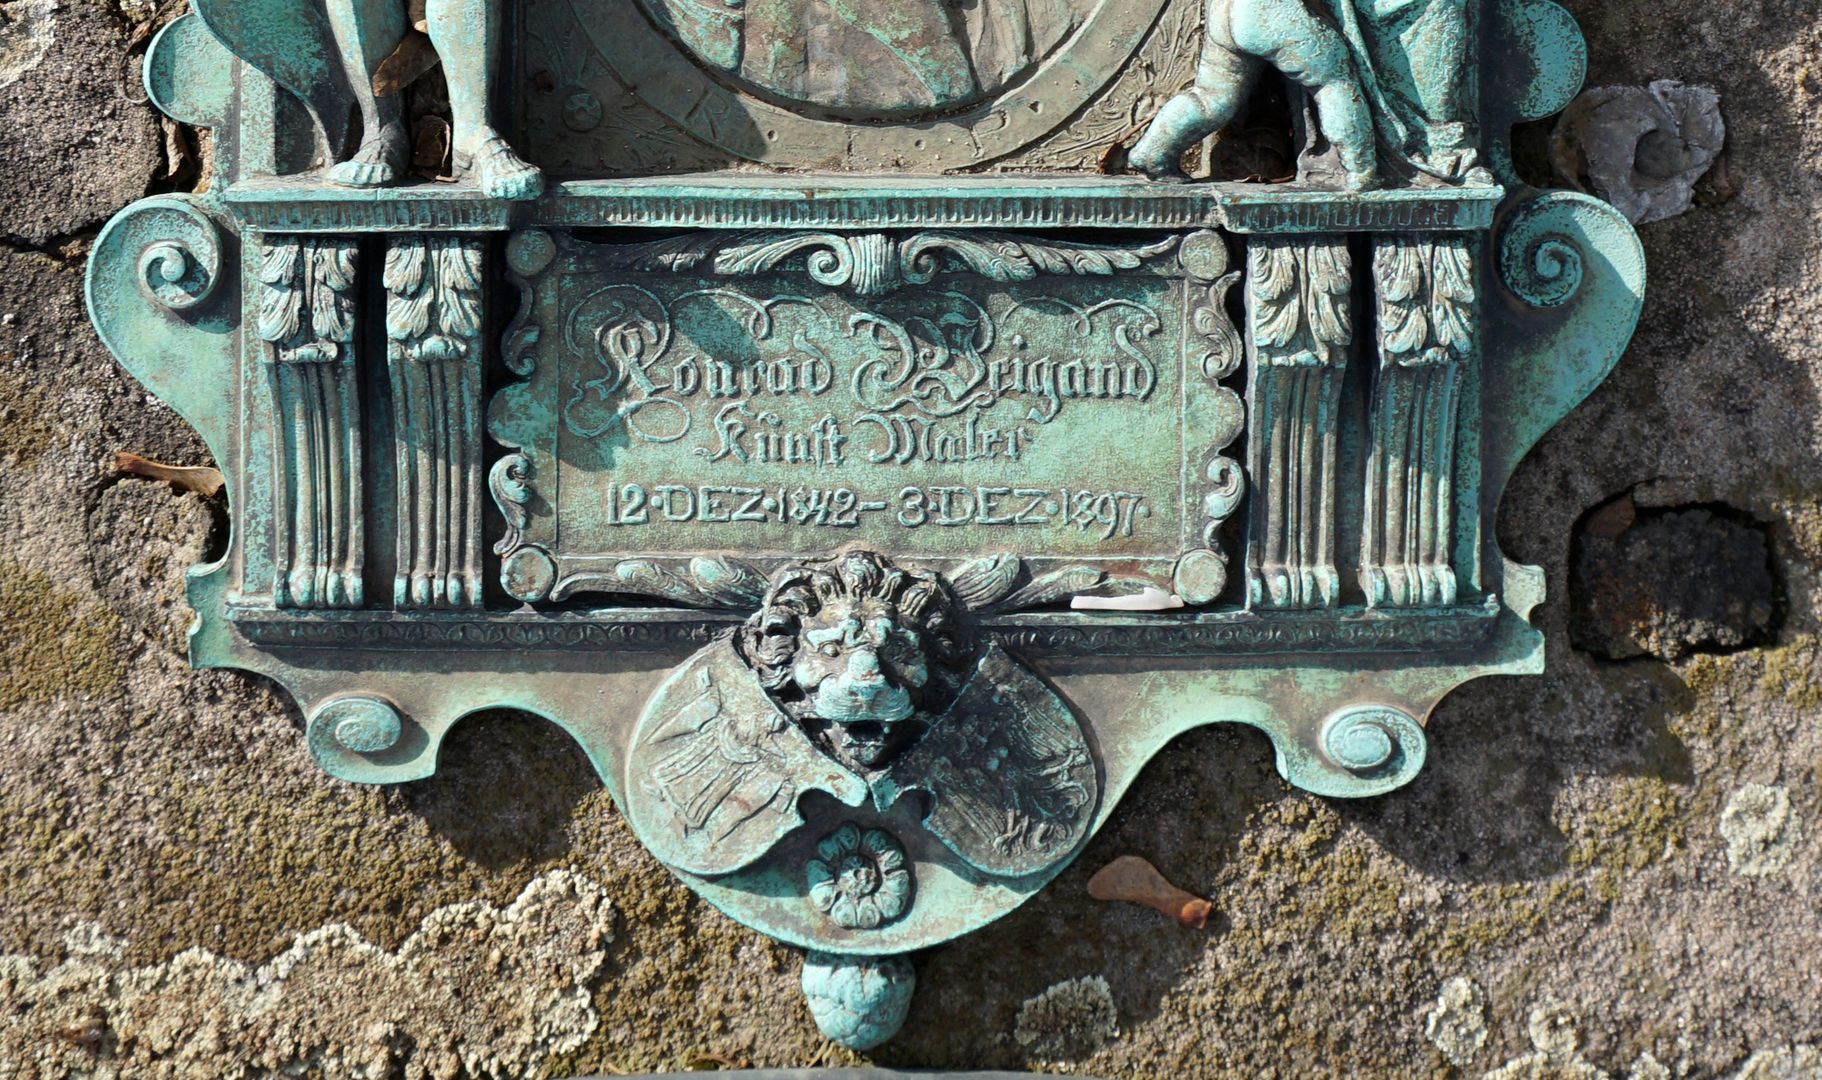 Epitaph of Konrad Weigand Inscription, below lion head with coats of arms of Munich and Nuremberg